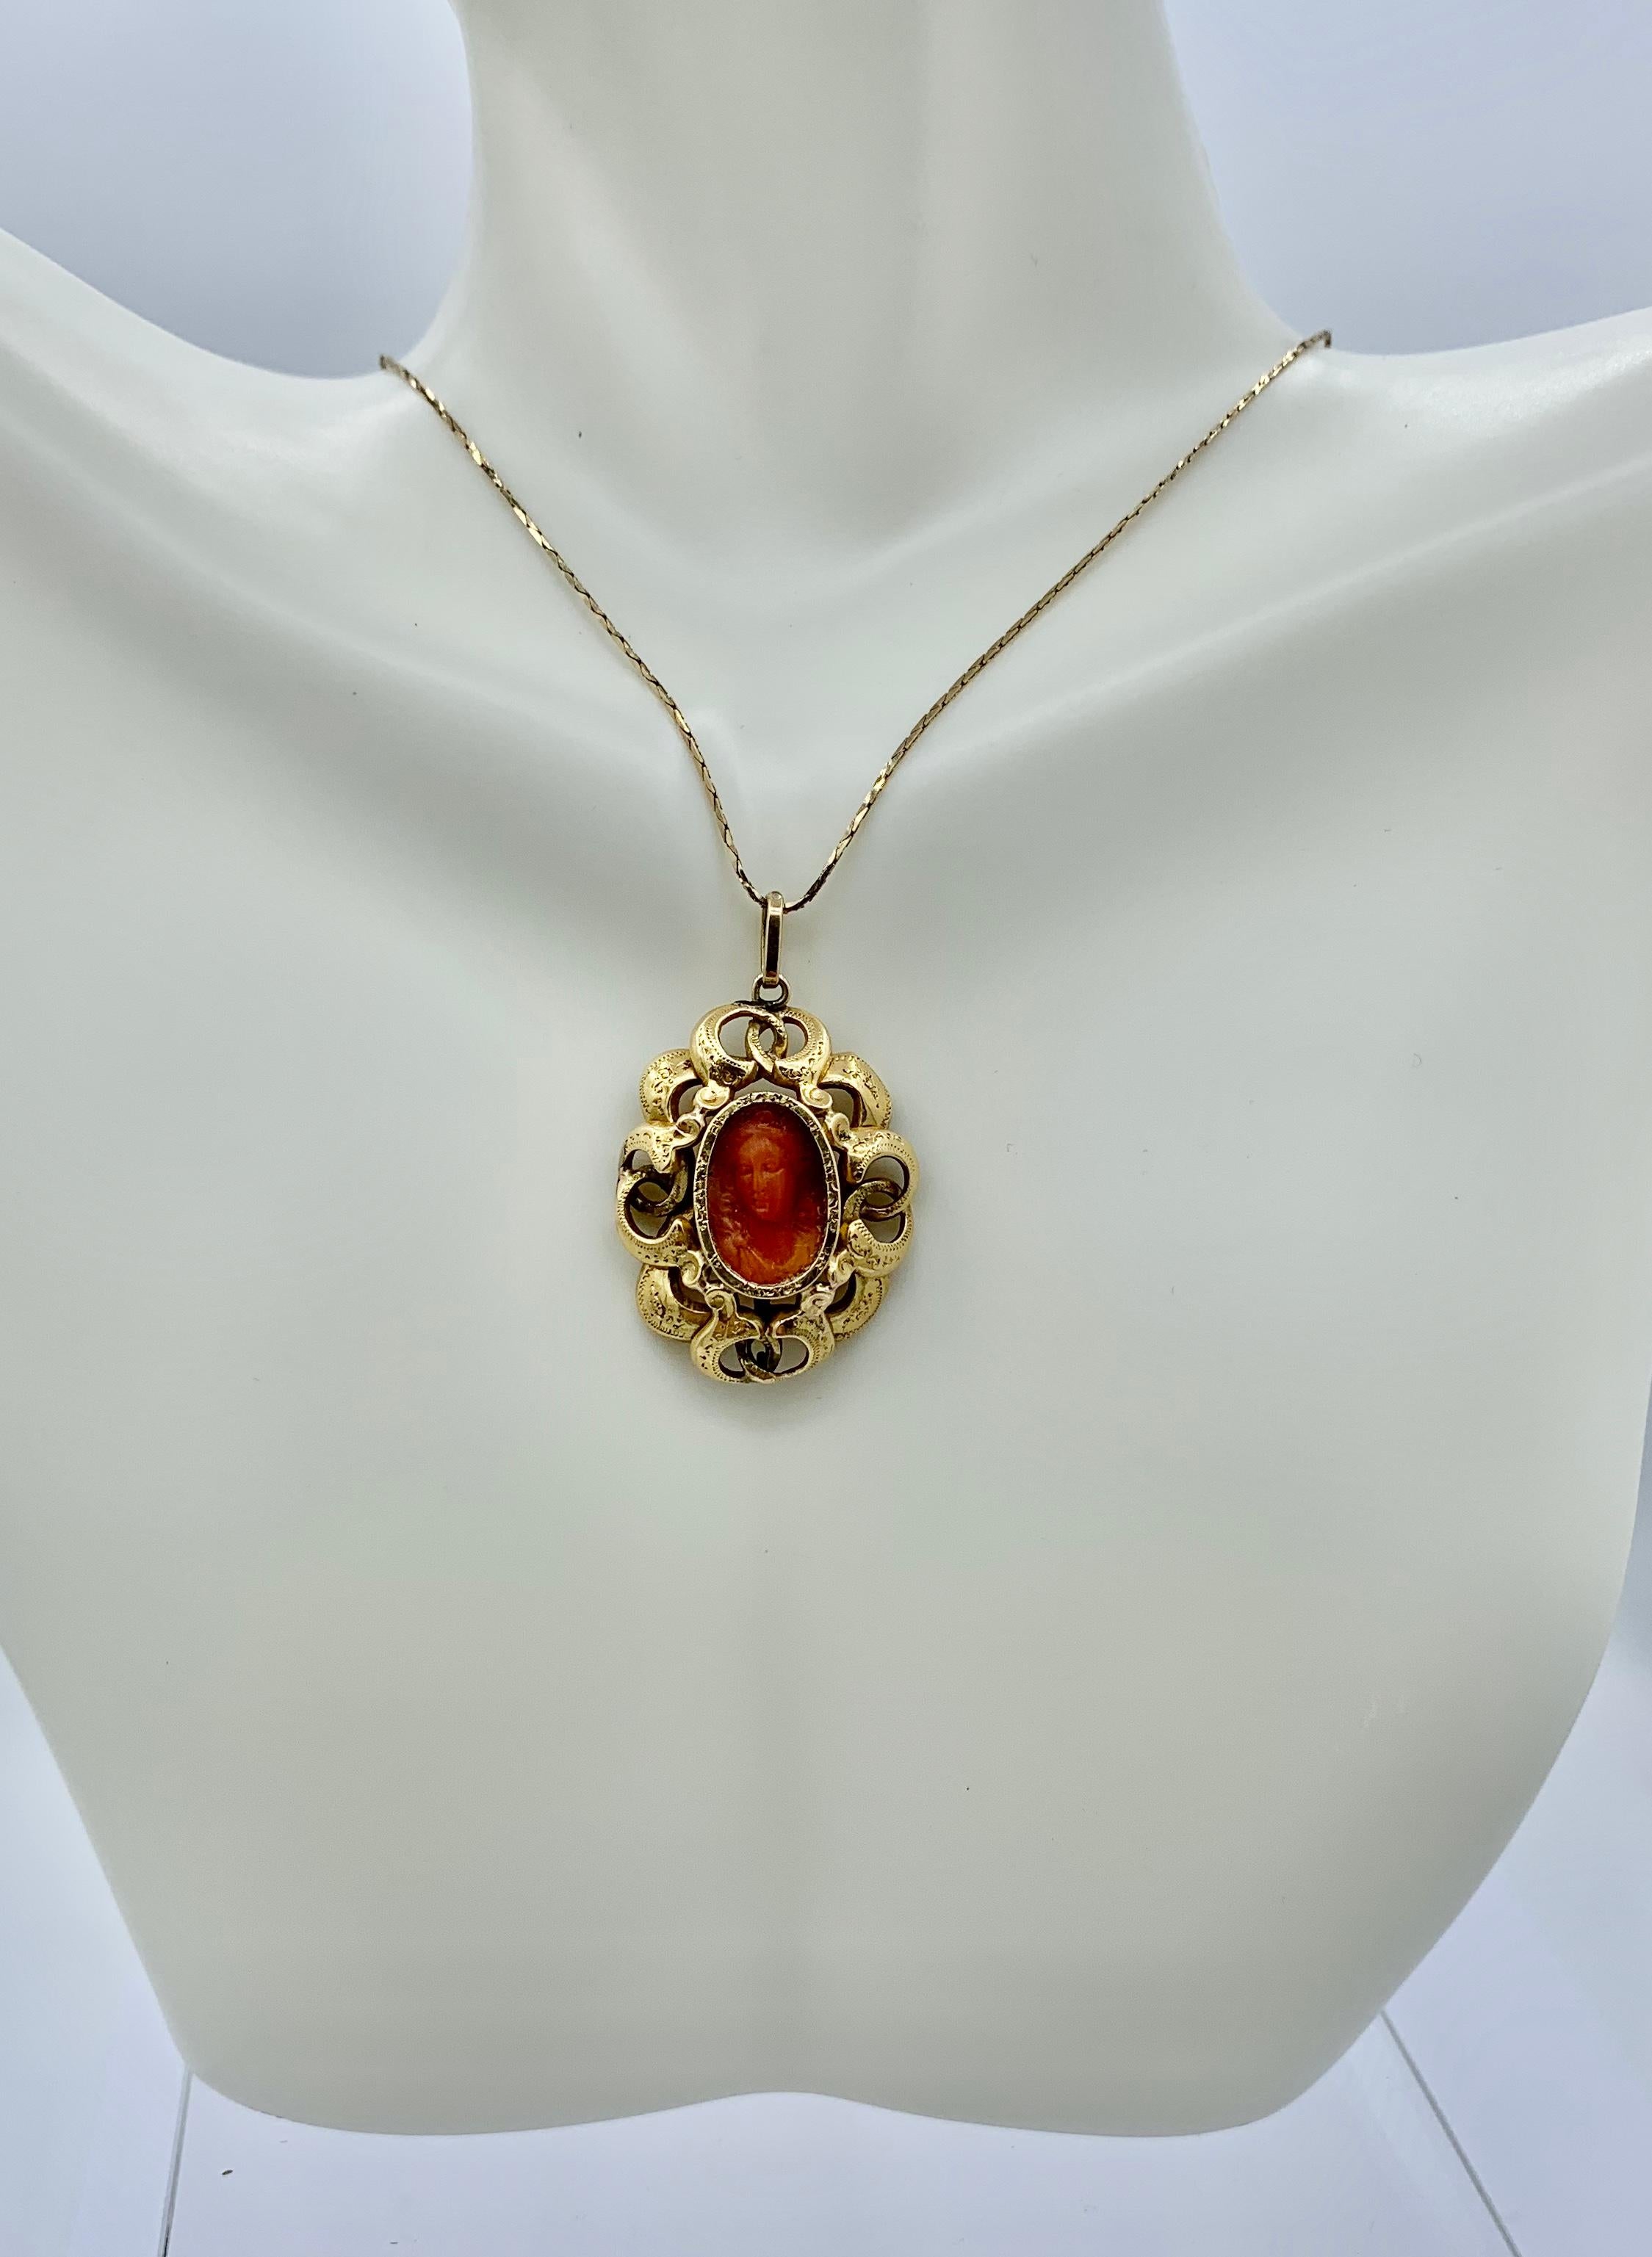 This is an absolutely stunning early antique Coral Cameo Pendant in 18 Karat Gold dating to the Georgian to Victorian period. The Coral Cameo is exquisite with a beautiful carving of a classical woman.   The color of the coral is a beautiful